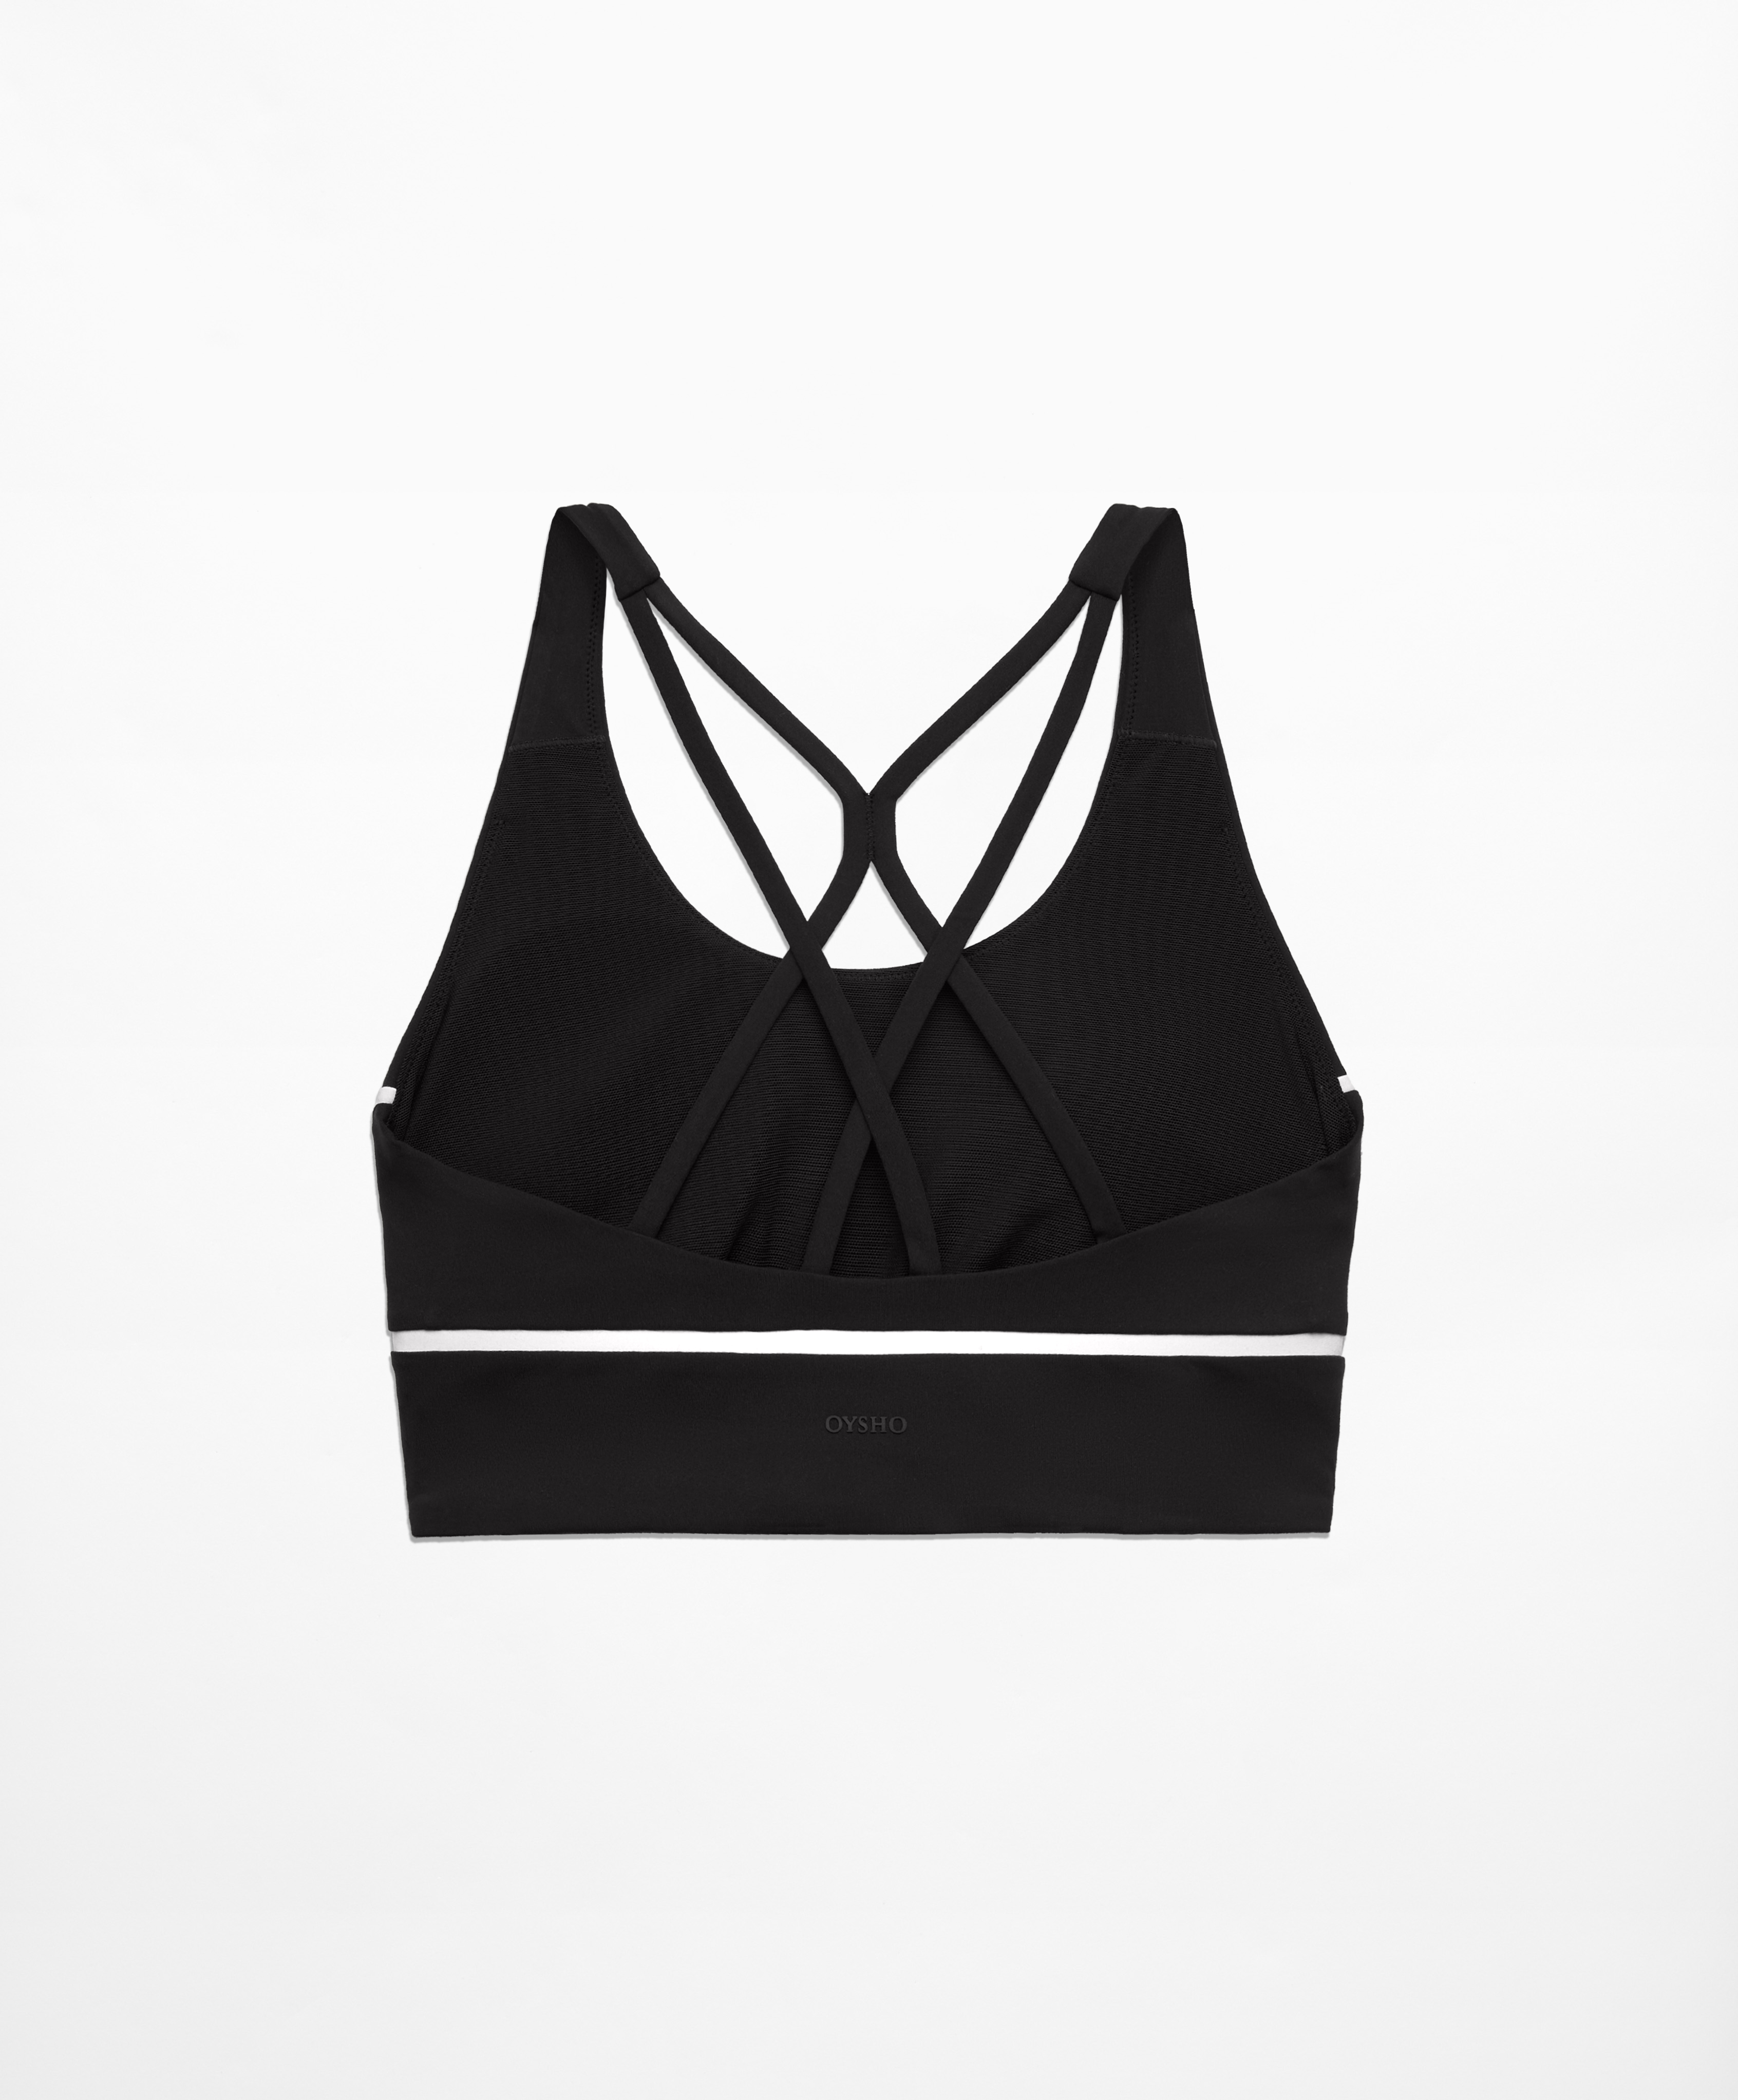 Medium-support Comfortlux sports bra with piping and cups